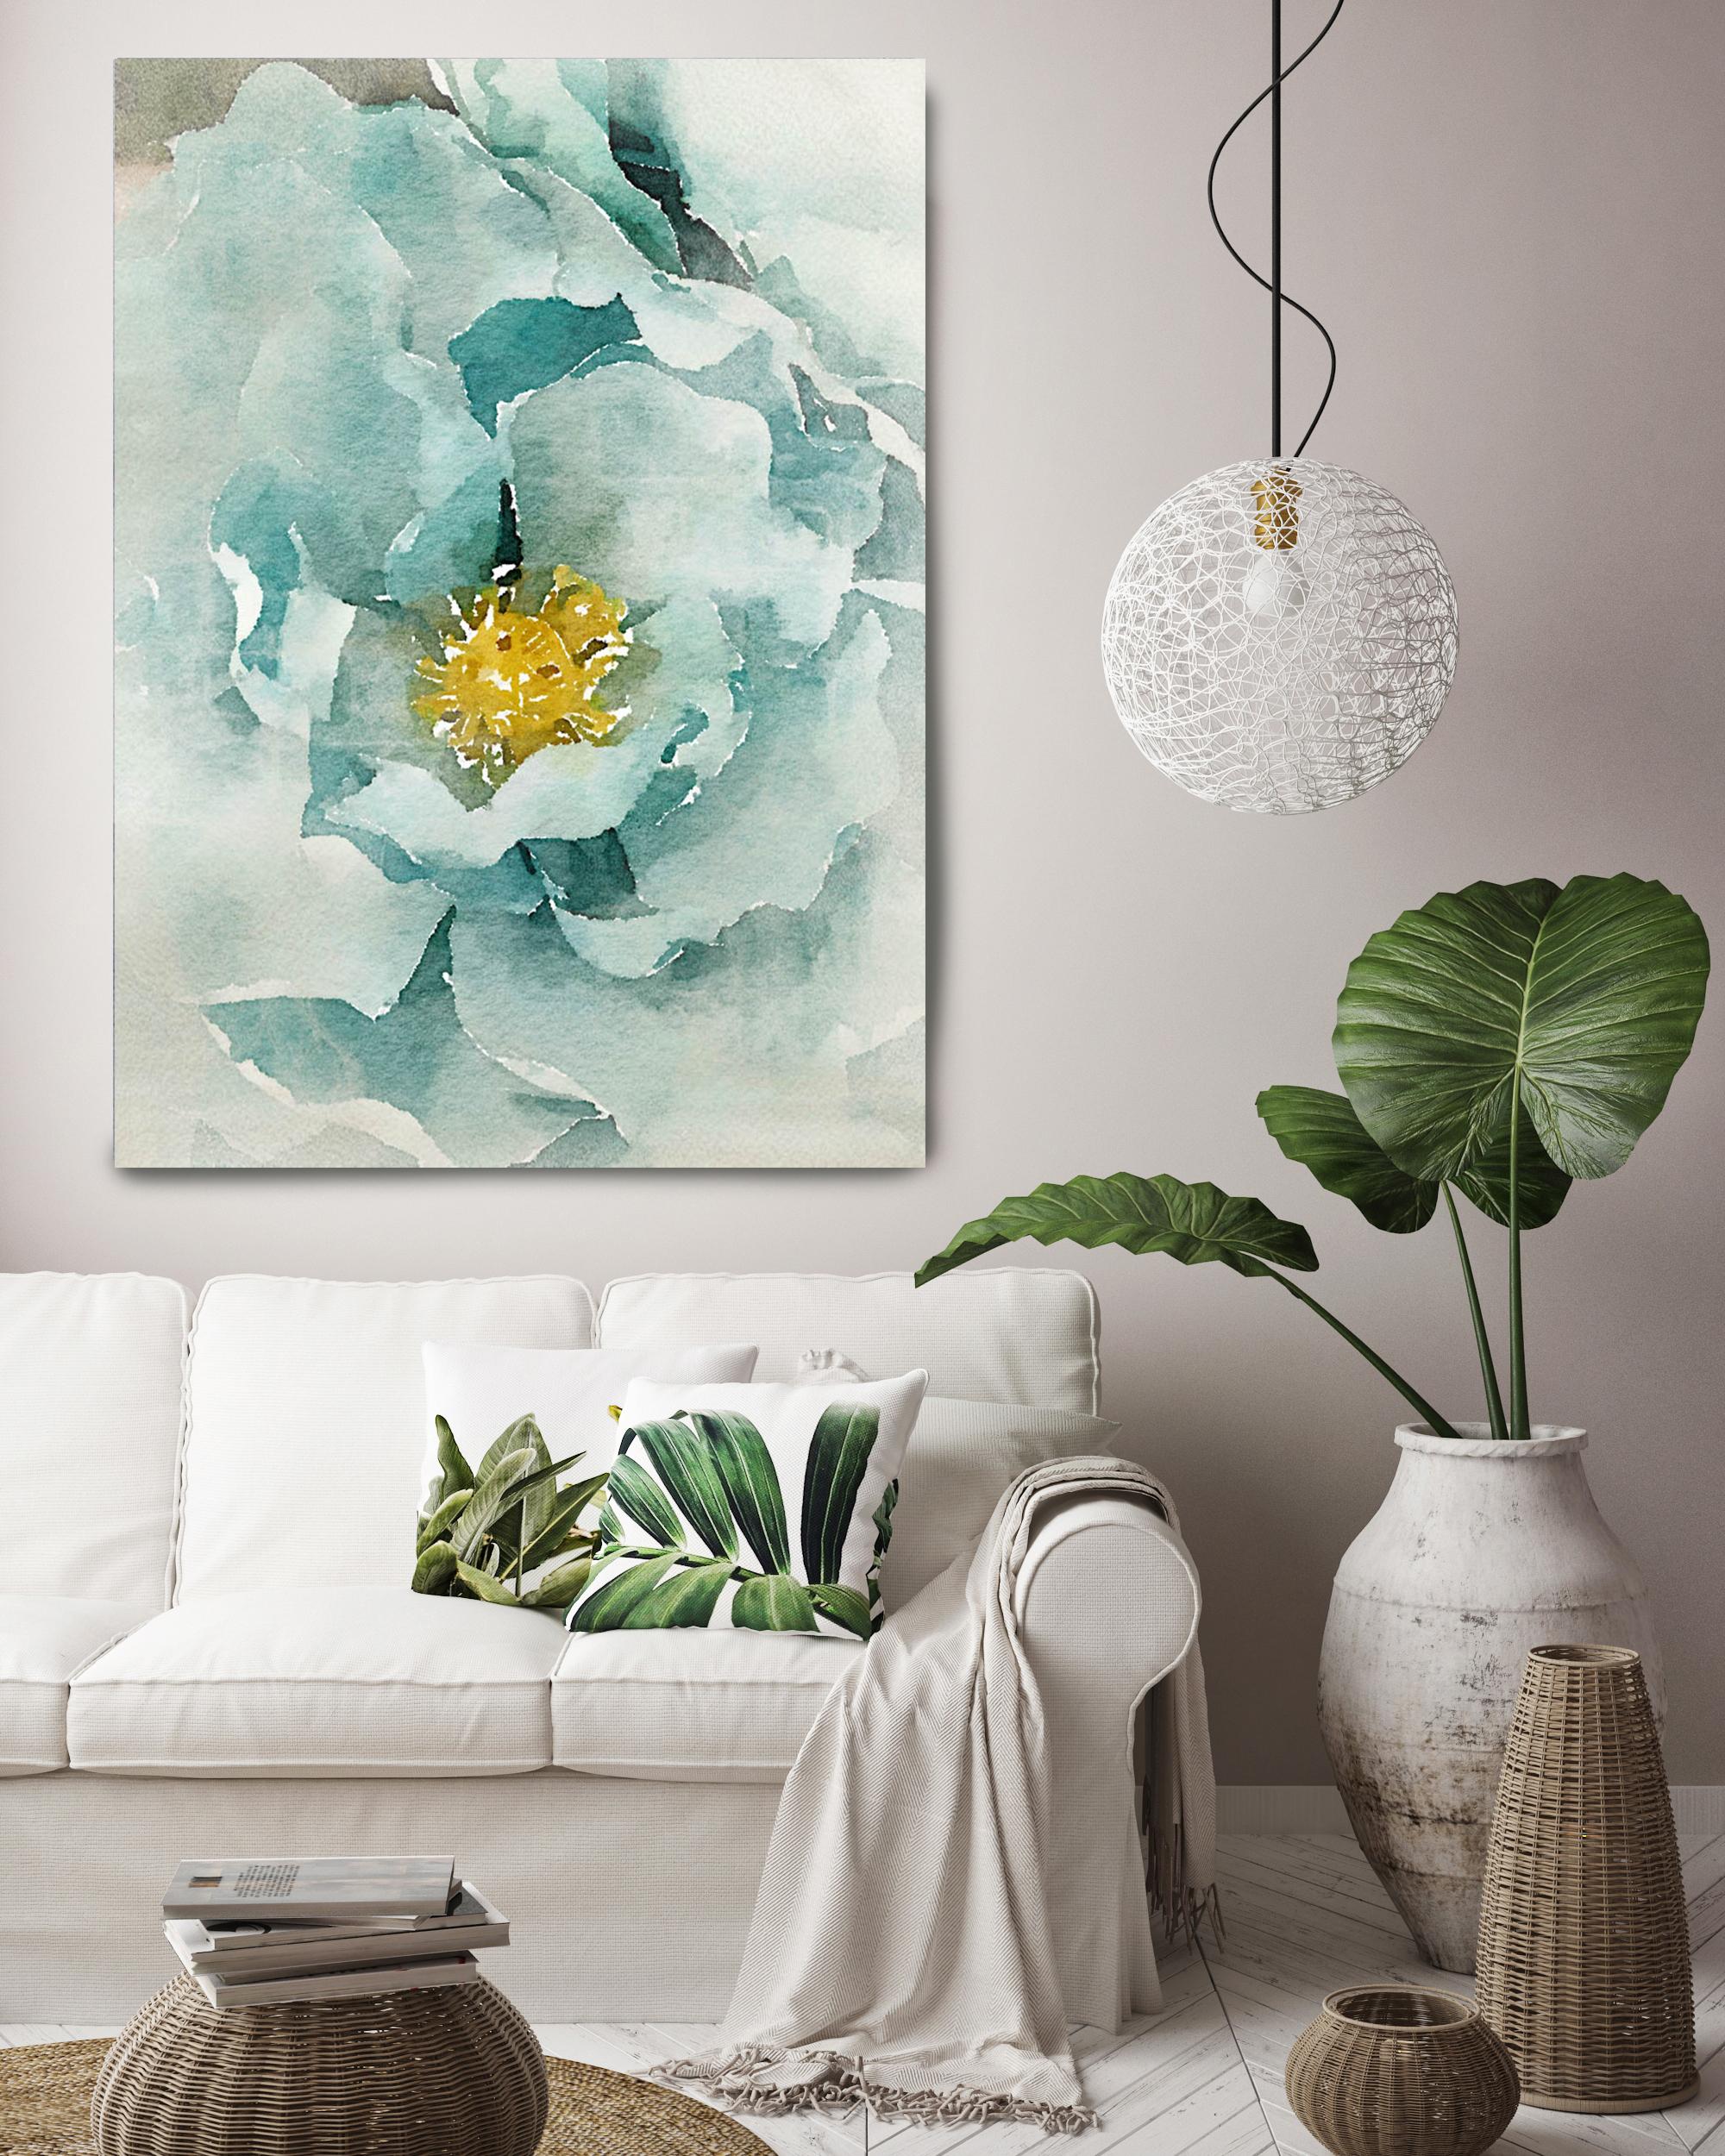 Aqua Dream Rustic Flowers Painting Embellished Giclee on Canvas 40w X 60h 1